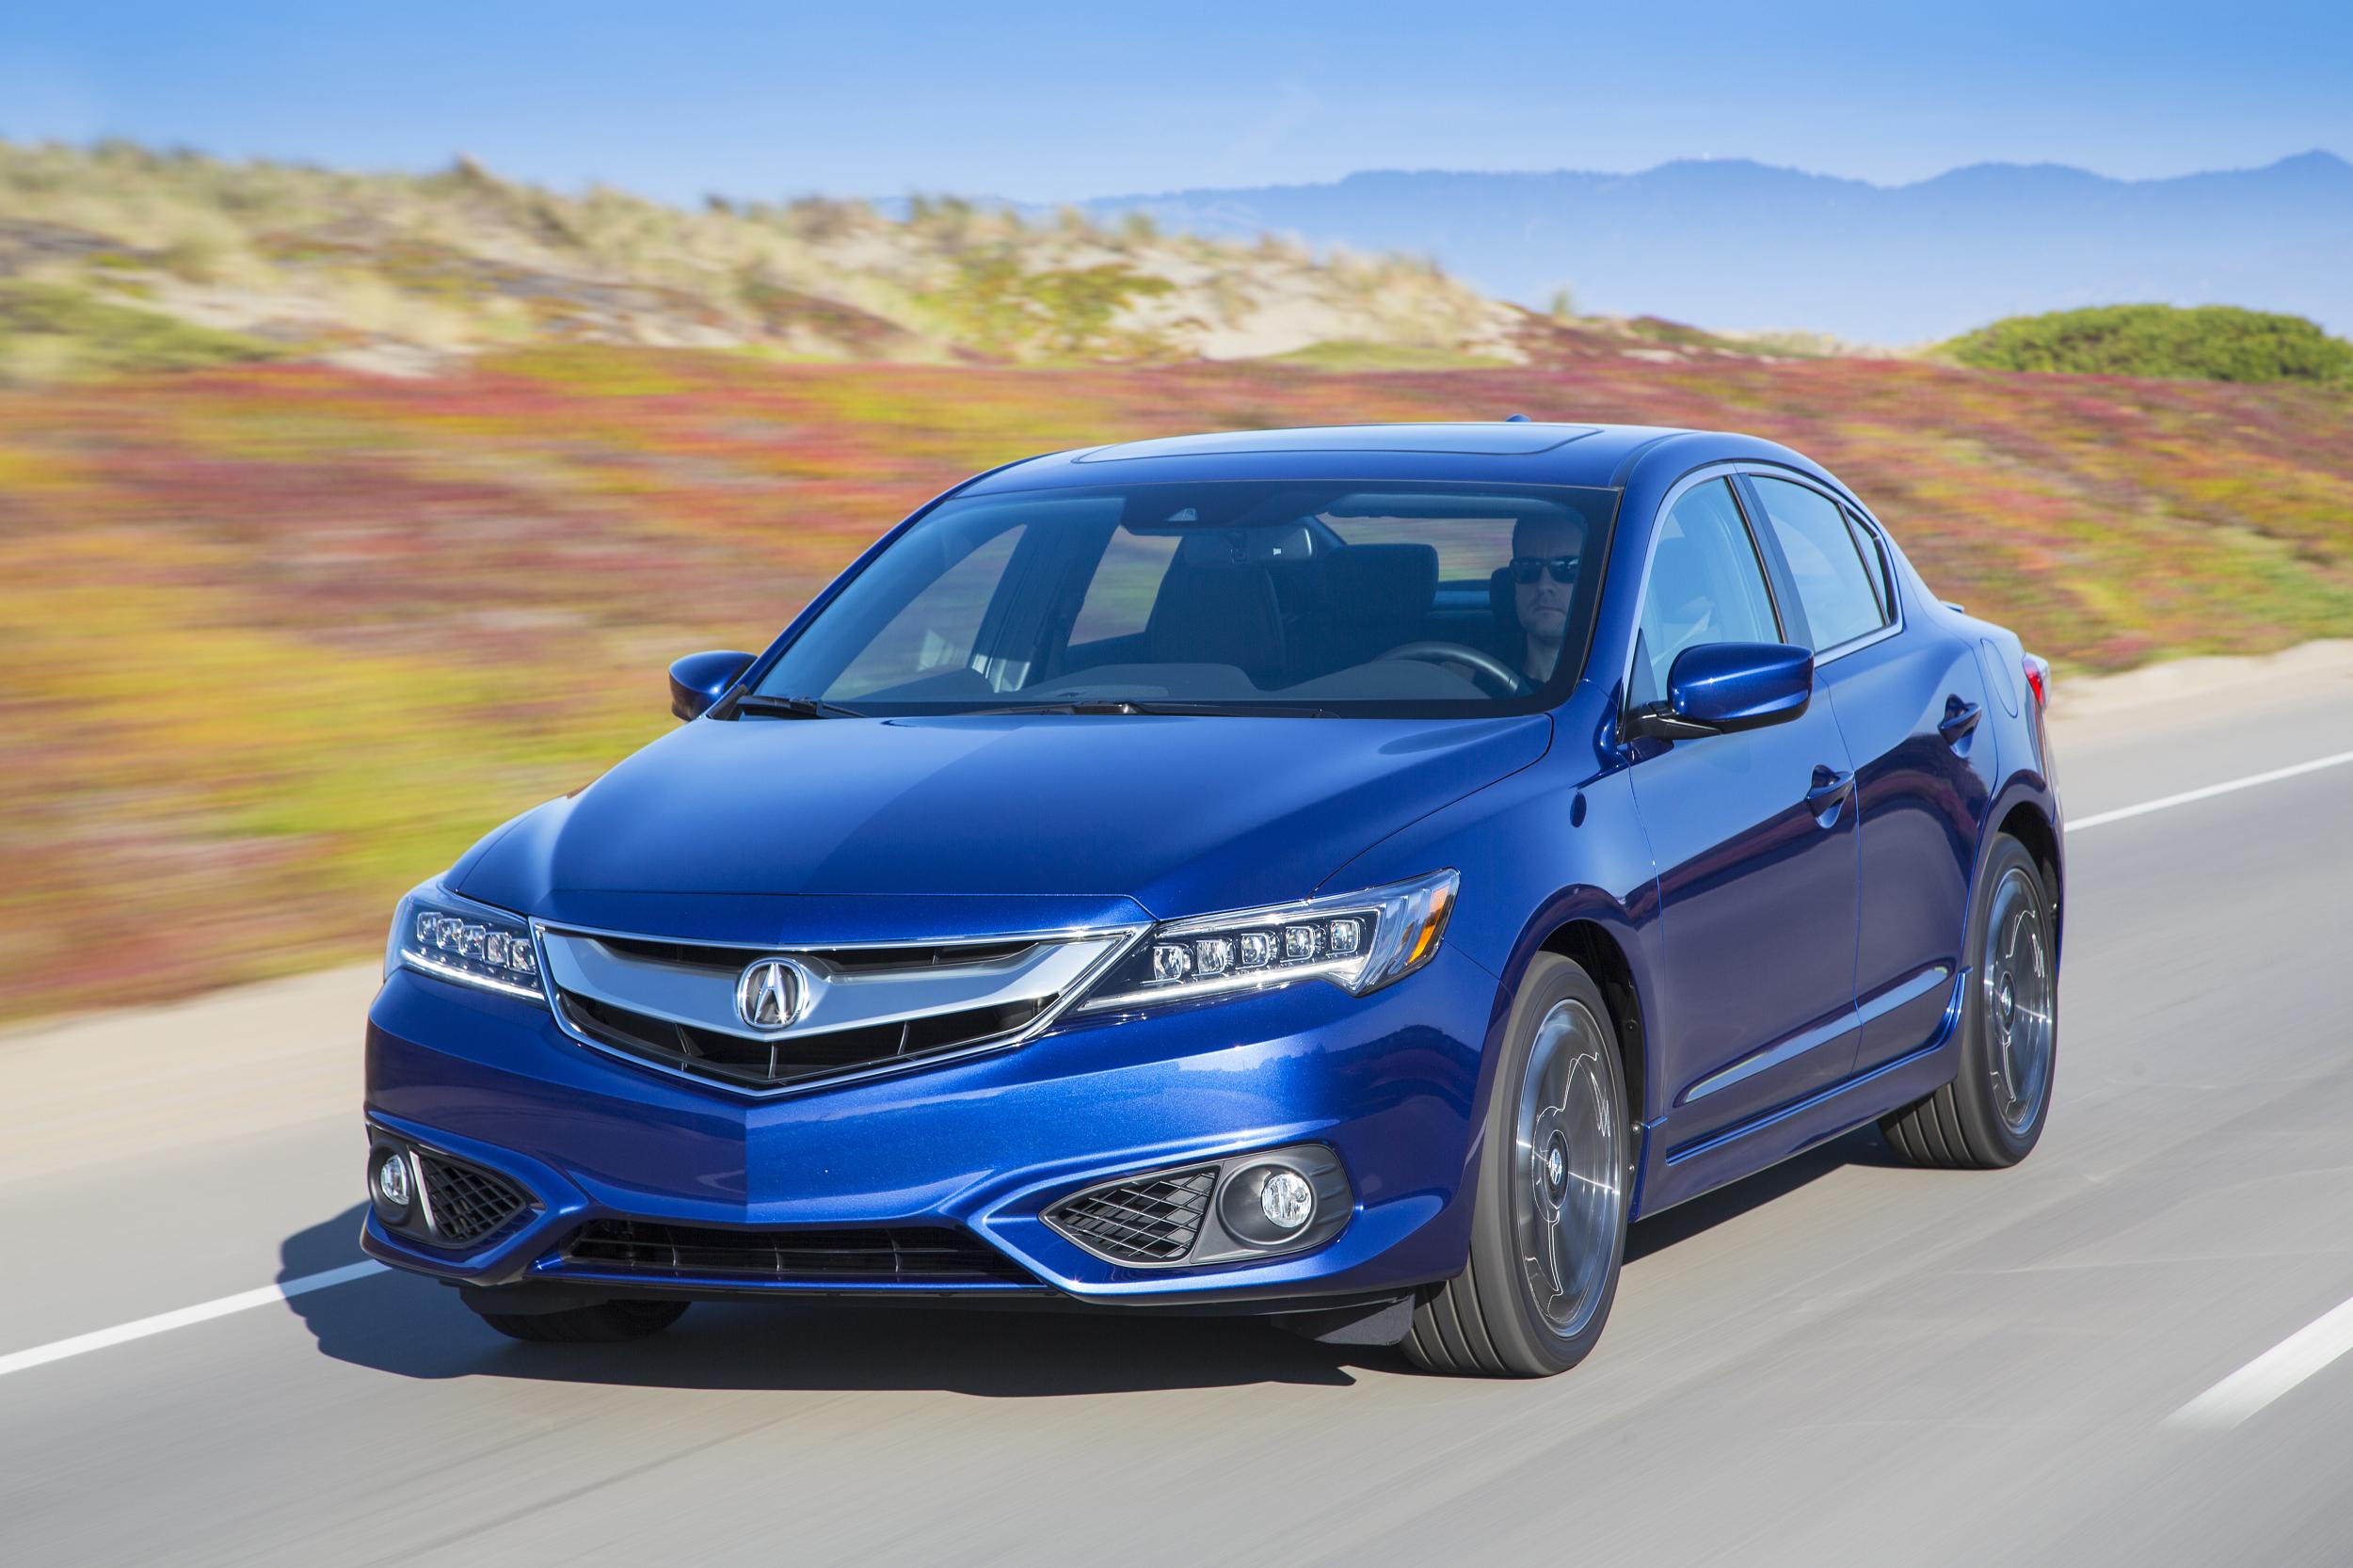 2016 Acura Ilx Pricing And Fuel Economy Ratings Divulged Autoevolution